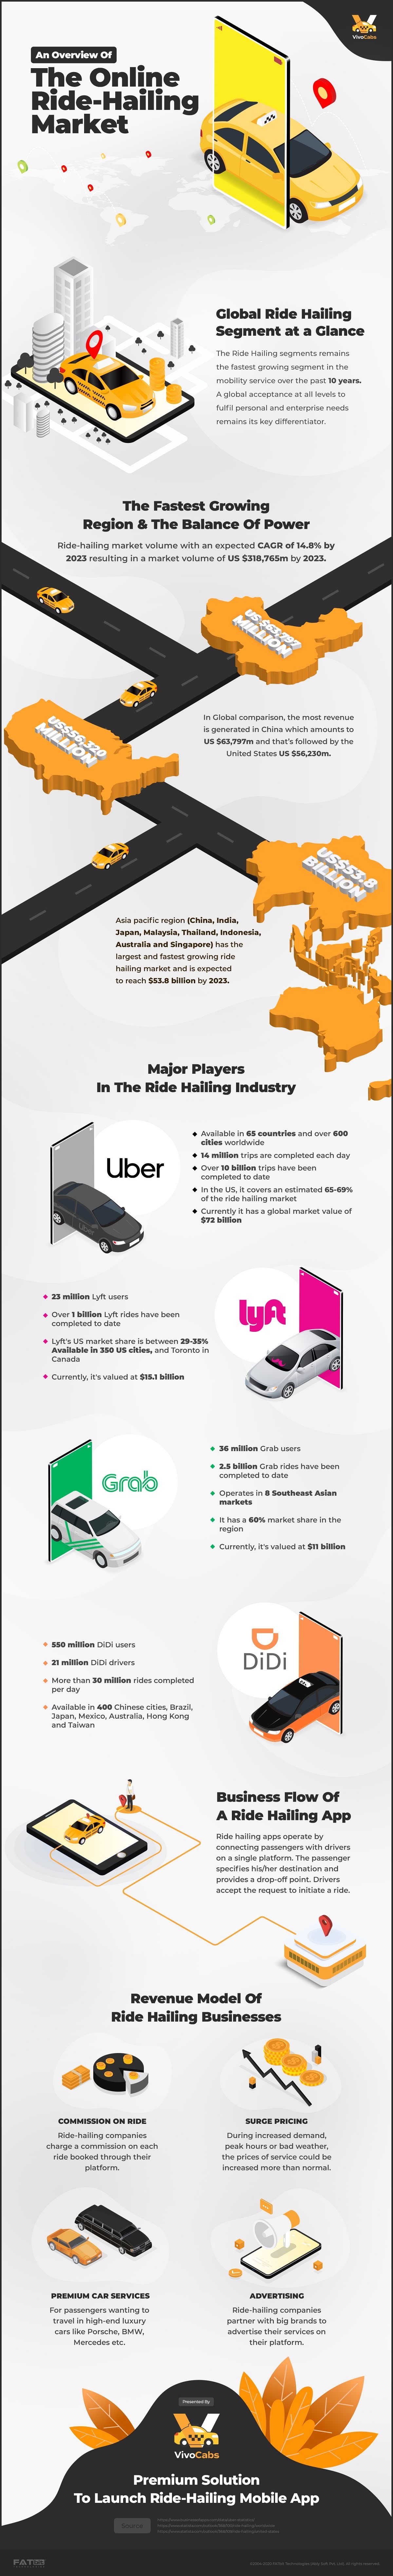 Current State of the Ride-Hailing Market & Business Opportunities #infographic